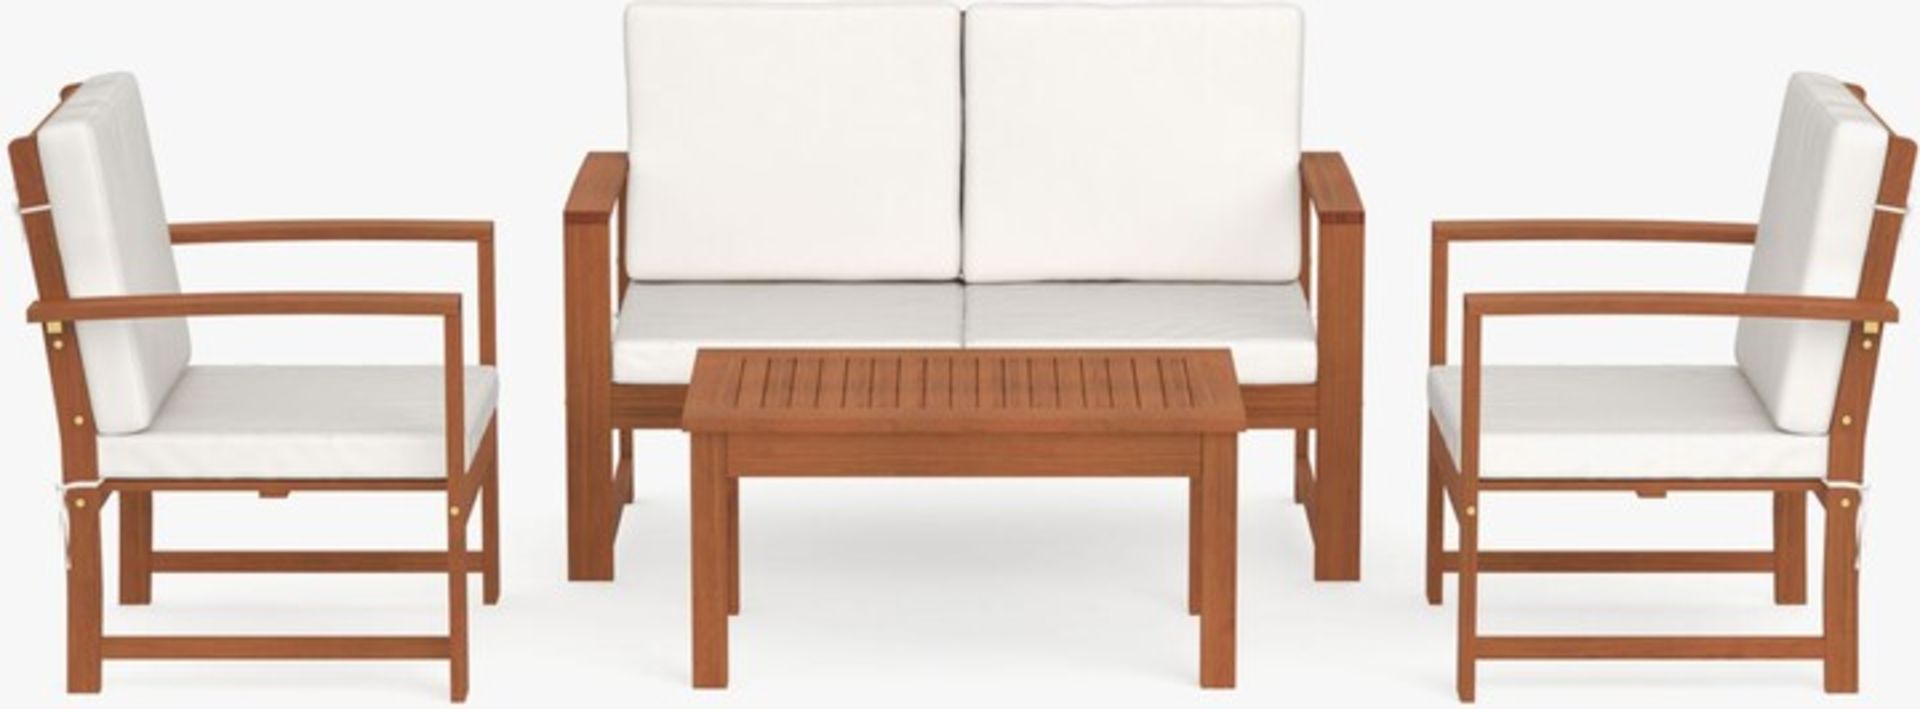 5 X BRAND NEW JOHN LEWIS 4-Seater Garden Lounging Table & Chairs Set. RRP £898.50. Upgrade your - Image 2 of 3